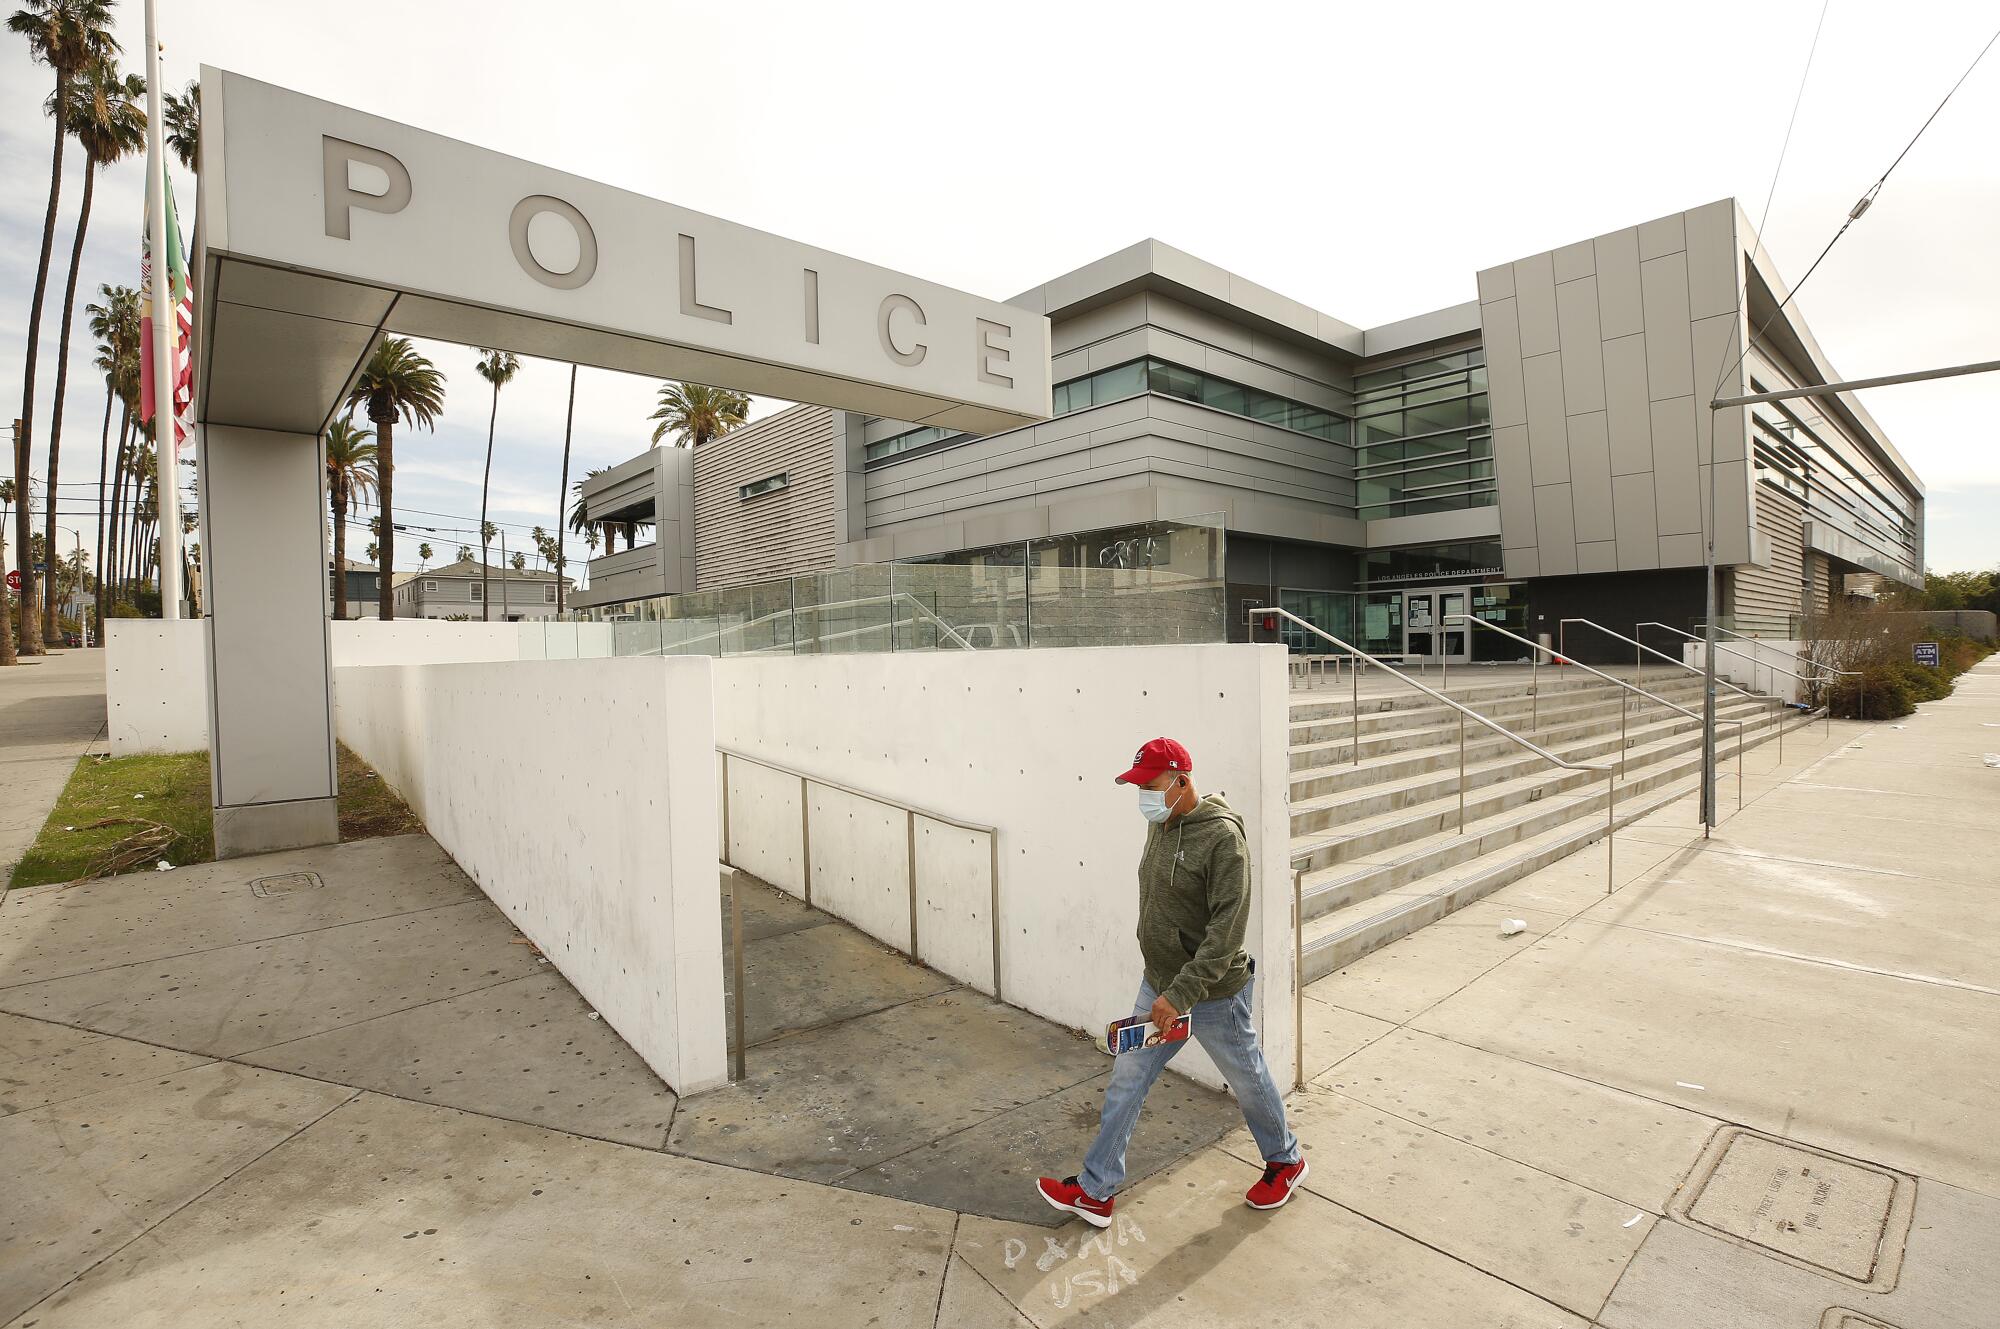 Korean community leaders are mobilizing to fight against the possibility that the LAPD could close the Olympic station.